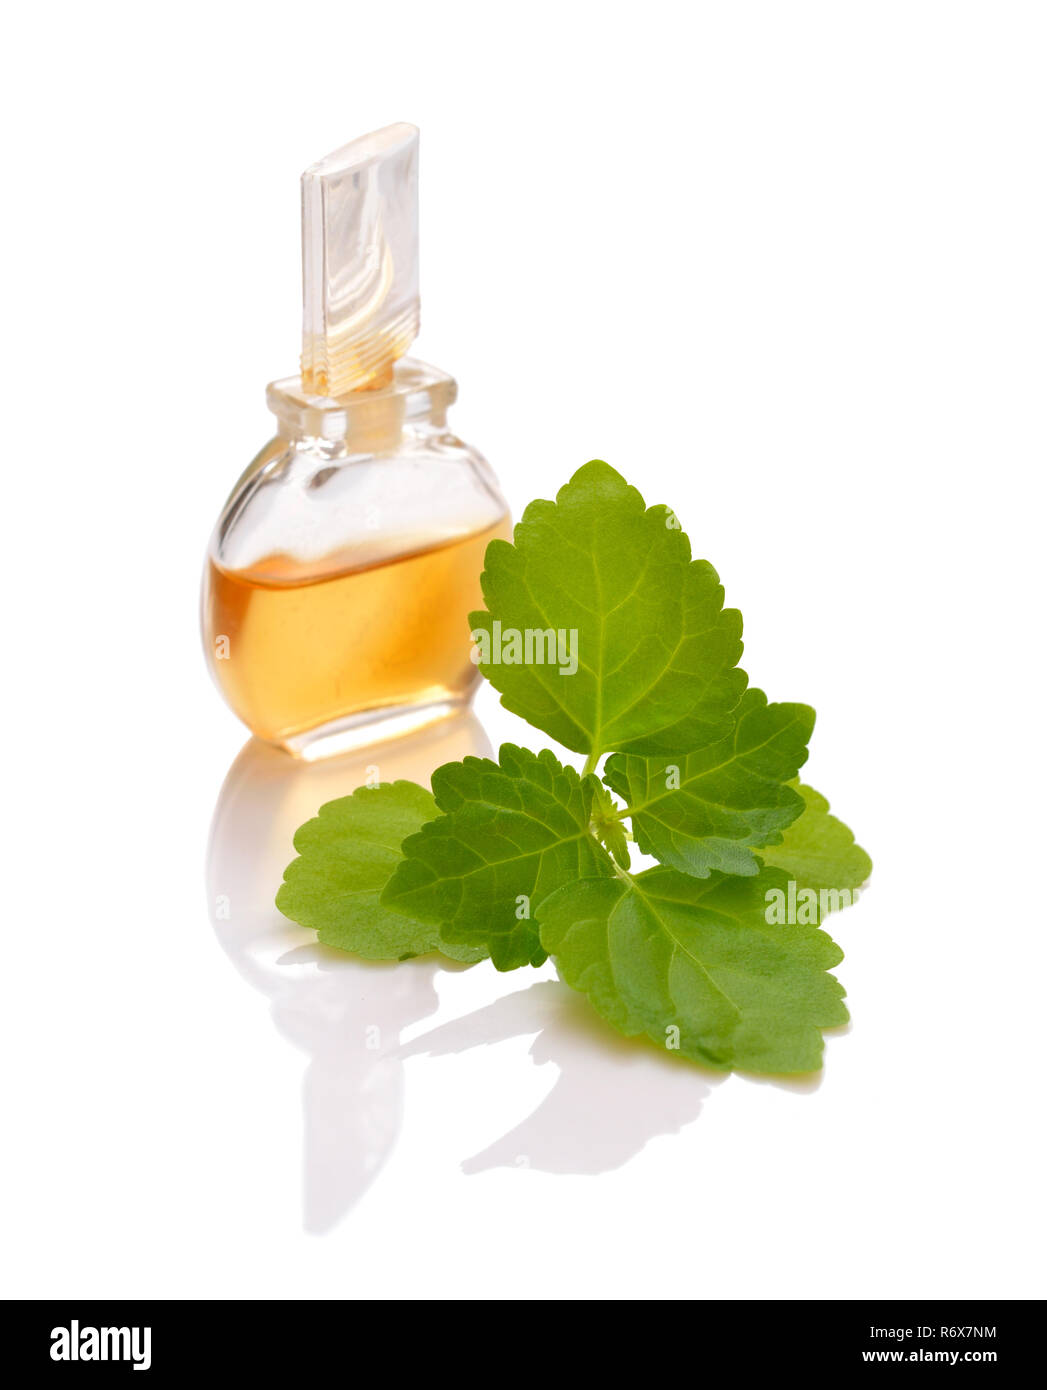 Patchouli sprig with essential oil. Isolated on white background. Stock Photo